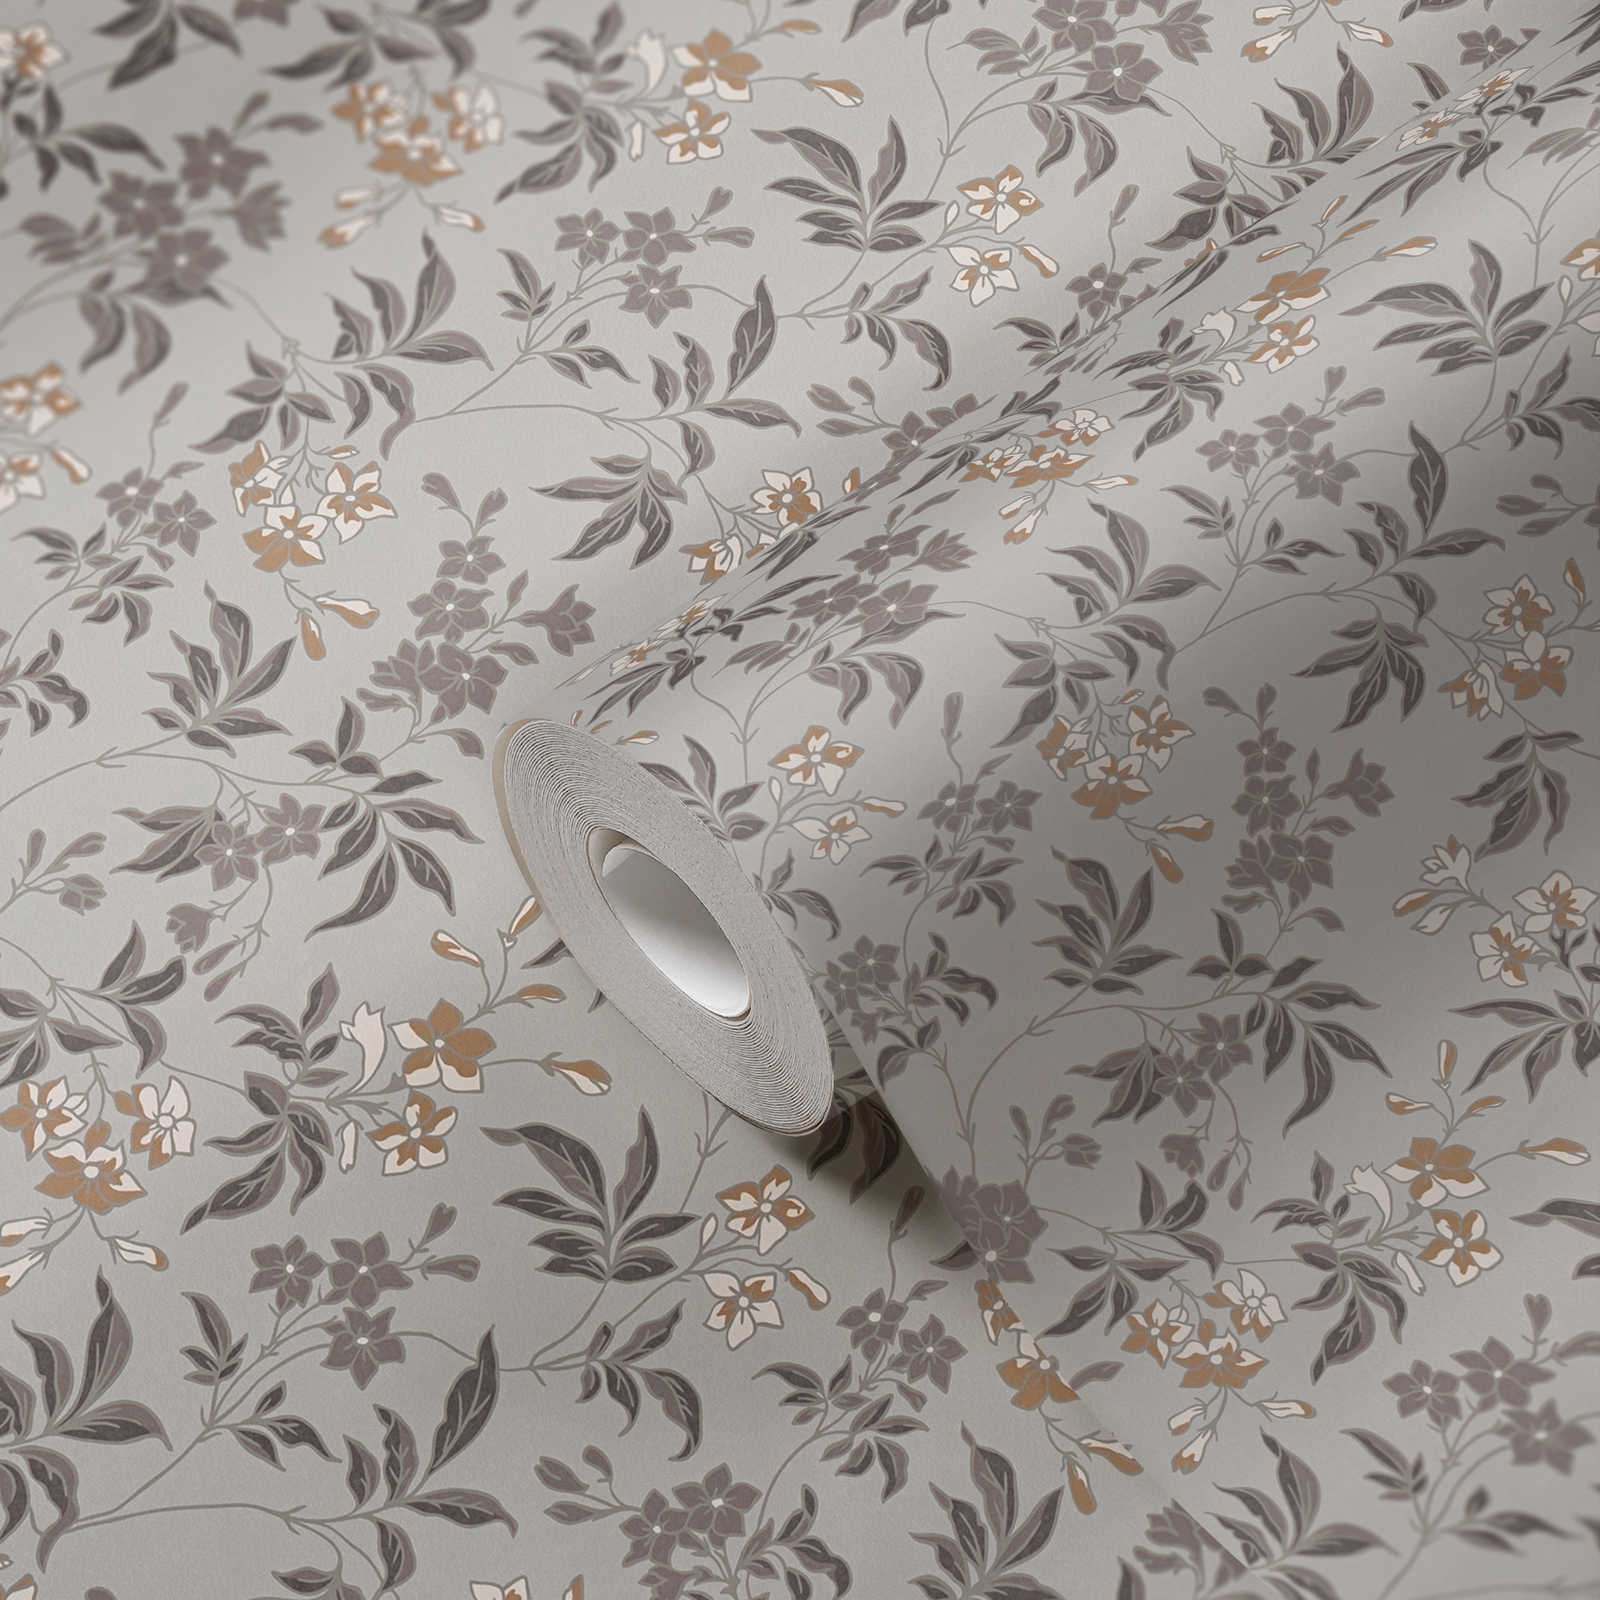             Floral pattern flowers and vines wallpaper - grey, brown, white
        